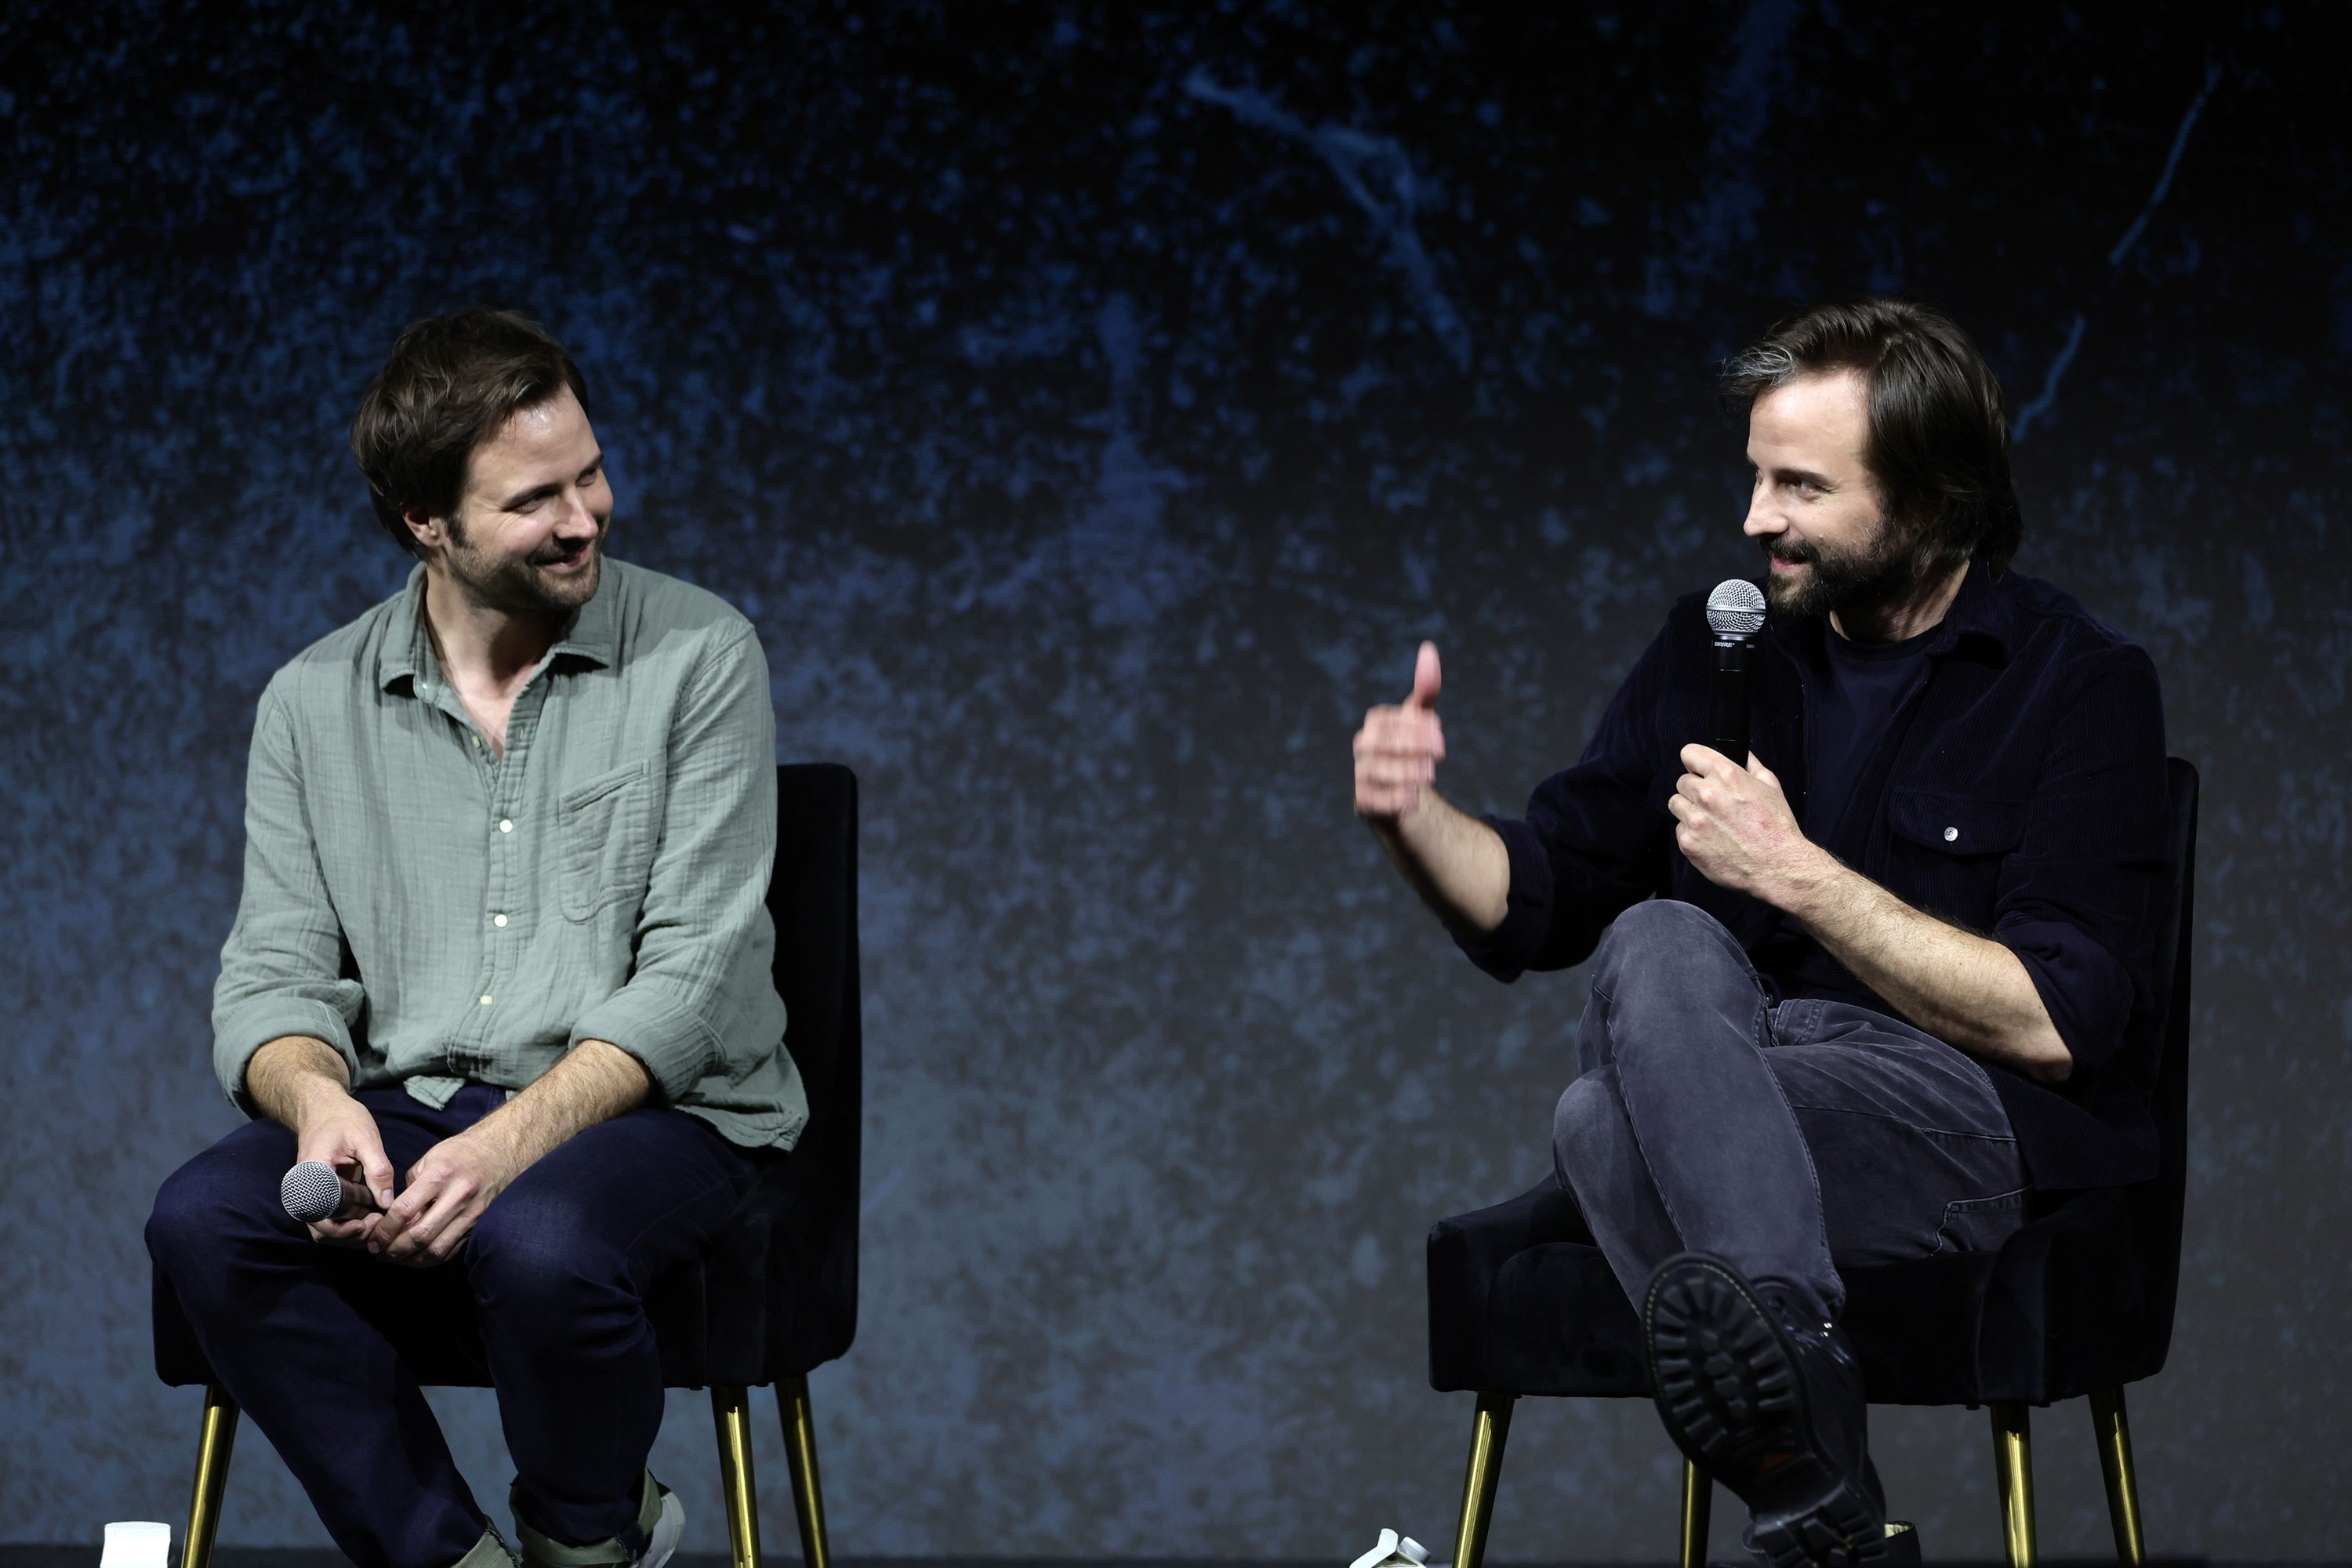 The Duffer brothers talking on stage at a conference